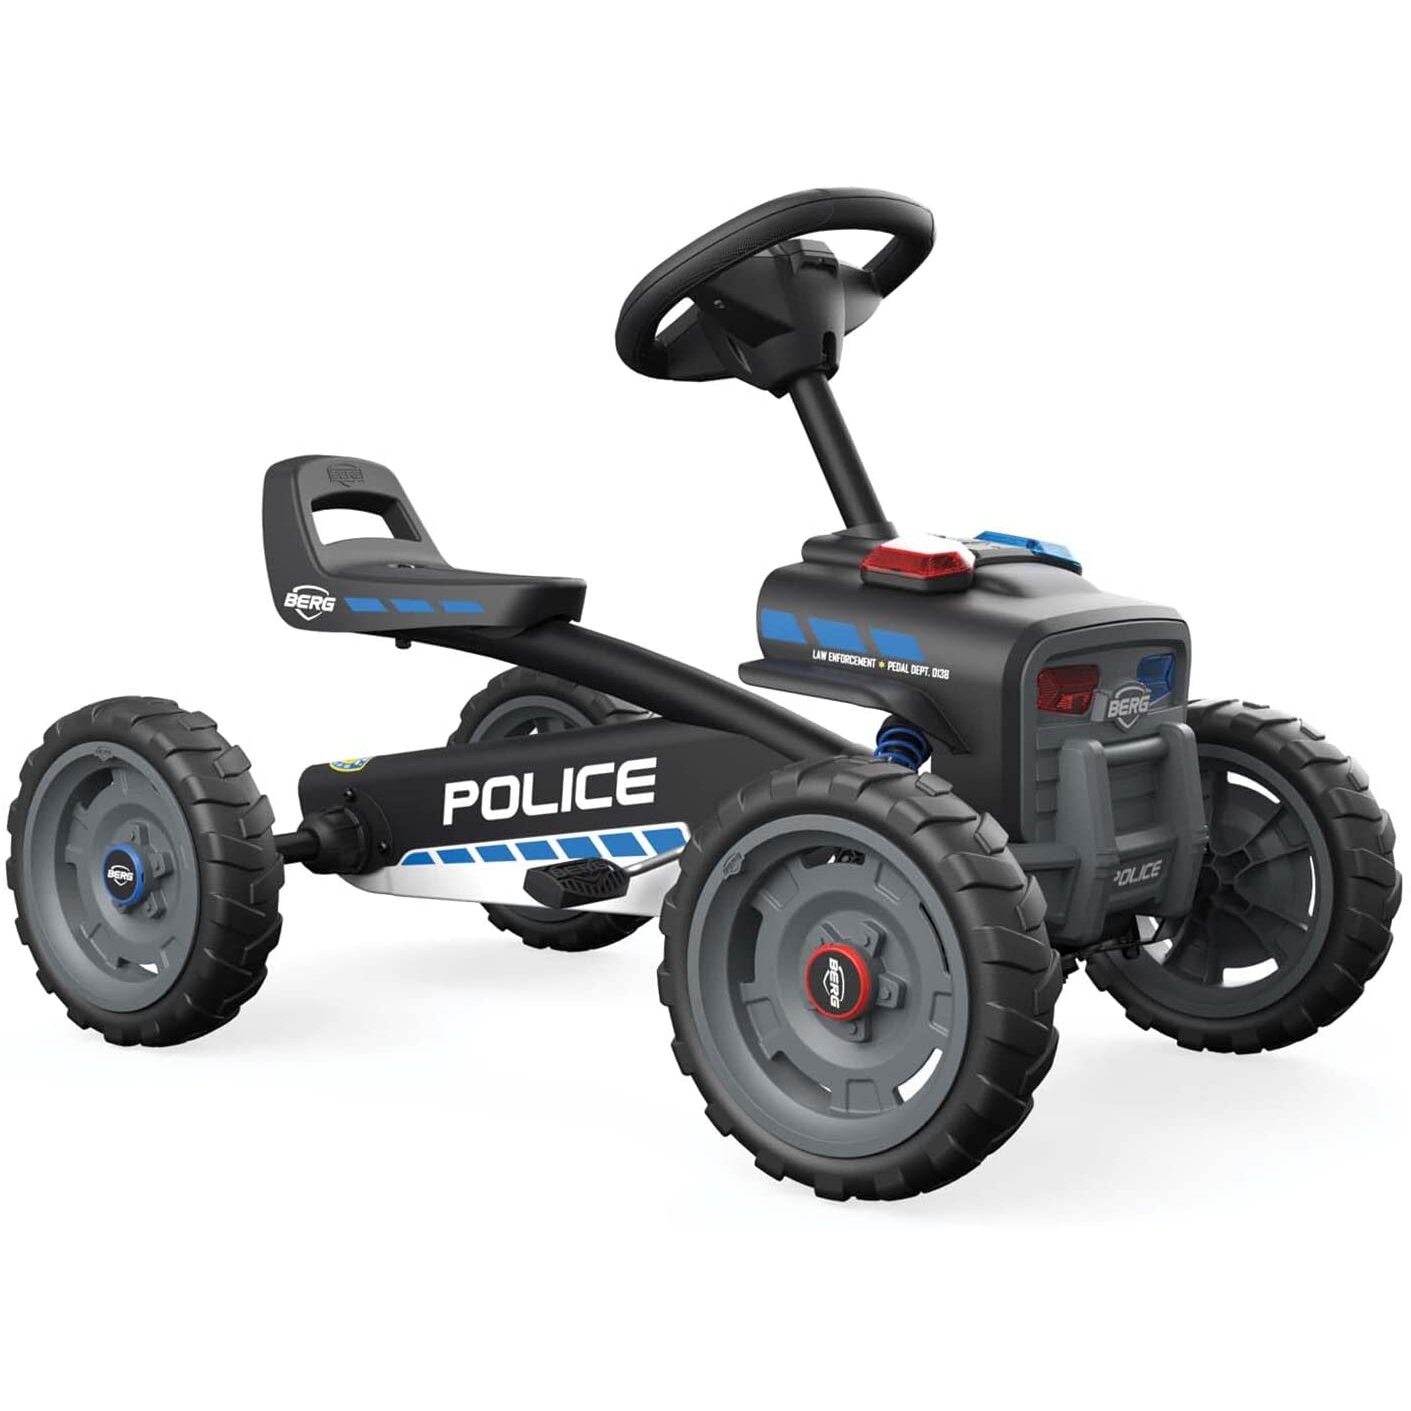 Berg Buzzy Police Pedal Kart Ages 2.5 - 5 Years